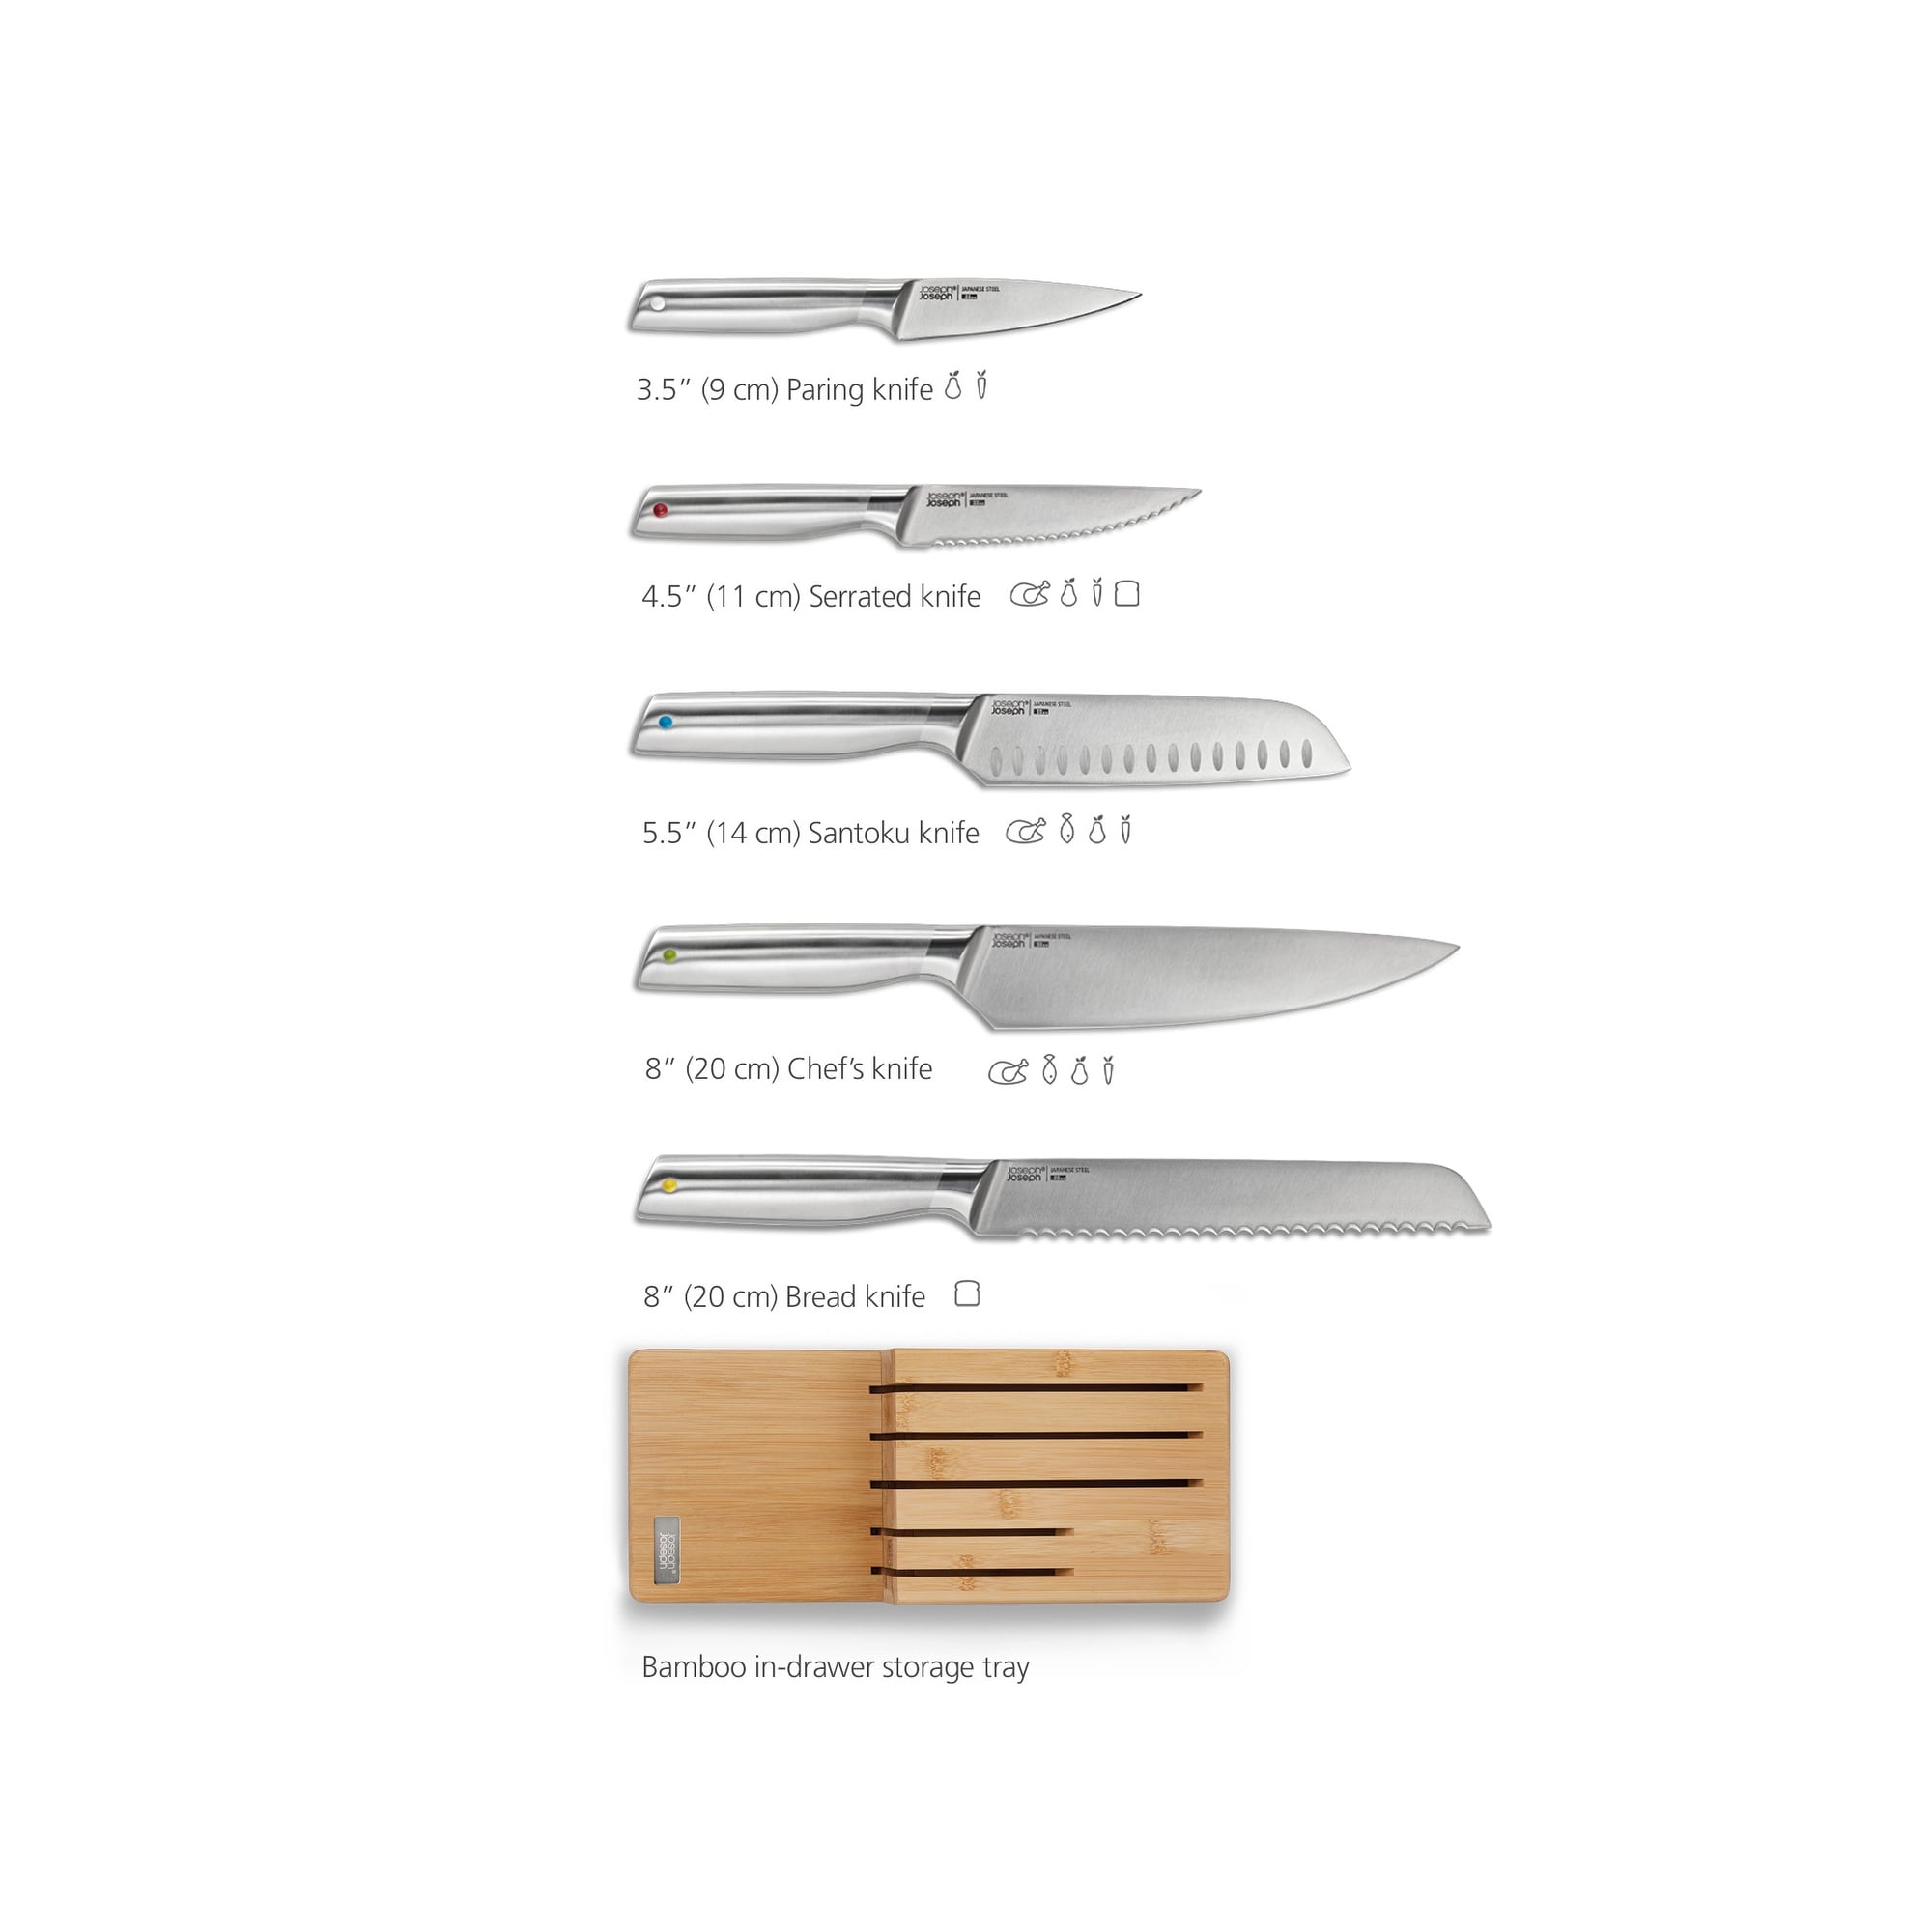 https://ak1.ostkcdn.com/images/products/is/images/direct/e406abbc68a6cd37ad9091d56ba41f1e52bbe8be/Joseph-Joseph-Elevate-Steel-5-piece-Knife-Set-with-In-drawer-Bamboo-Storage-Tray.jpg